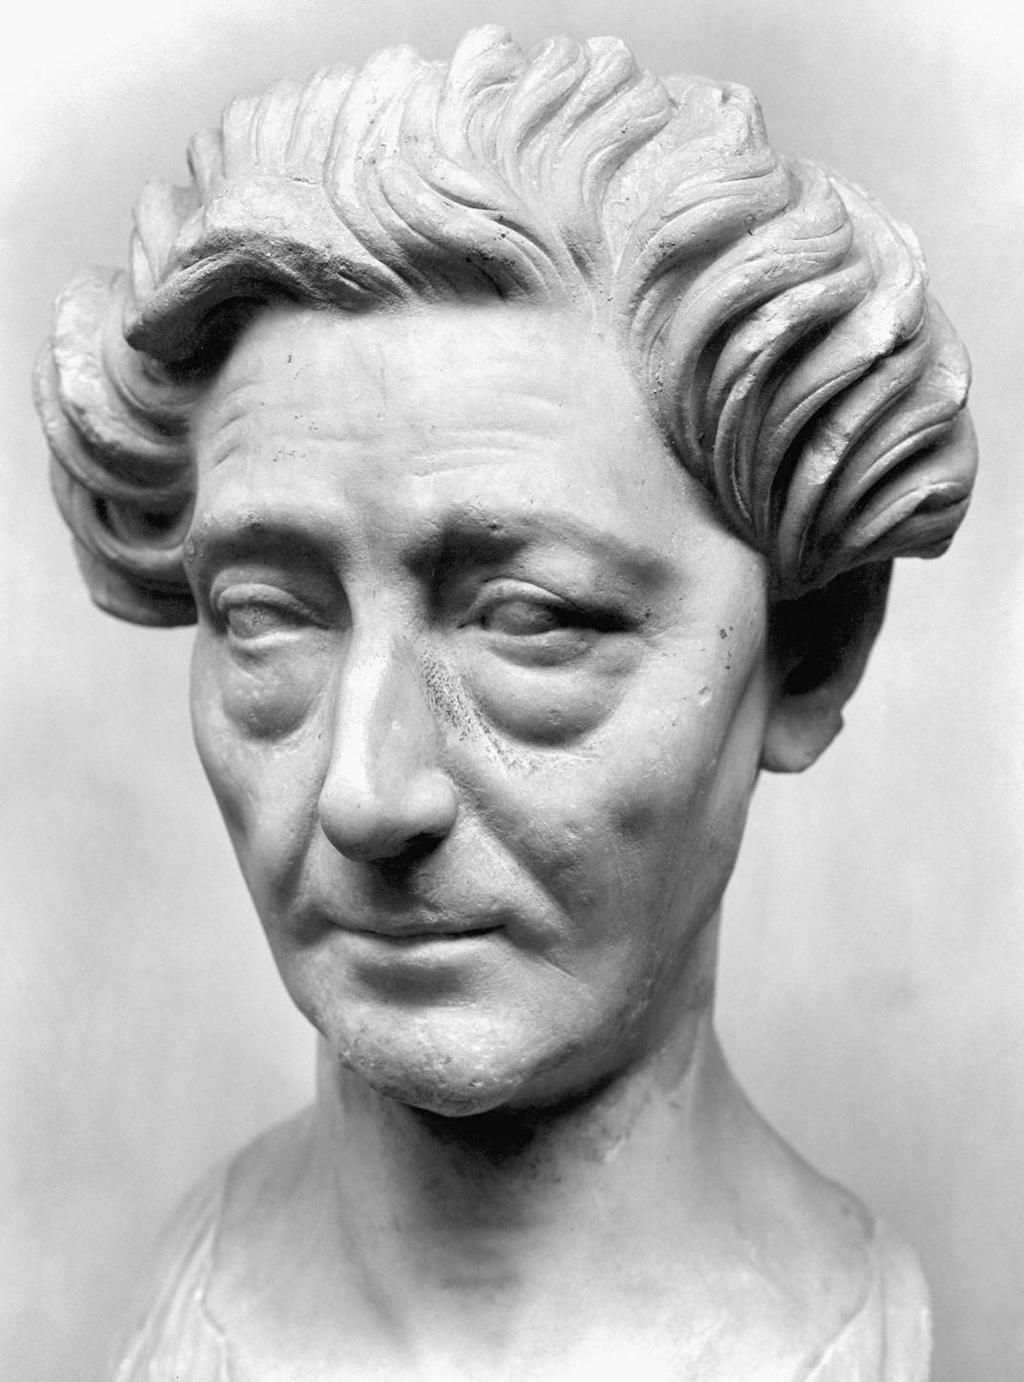 Portrait bust of middle-aged Flavian